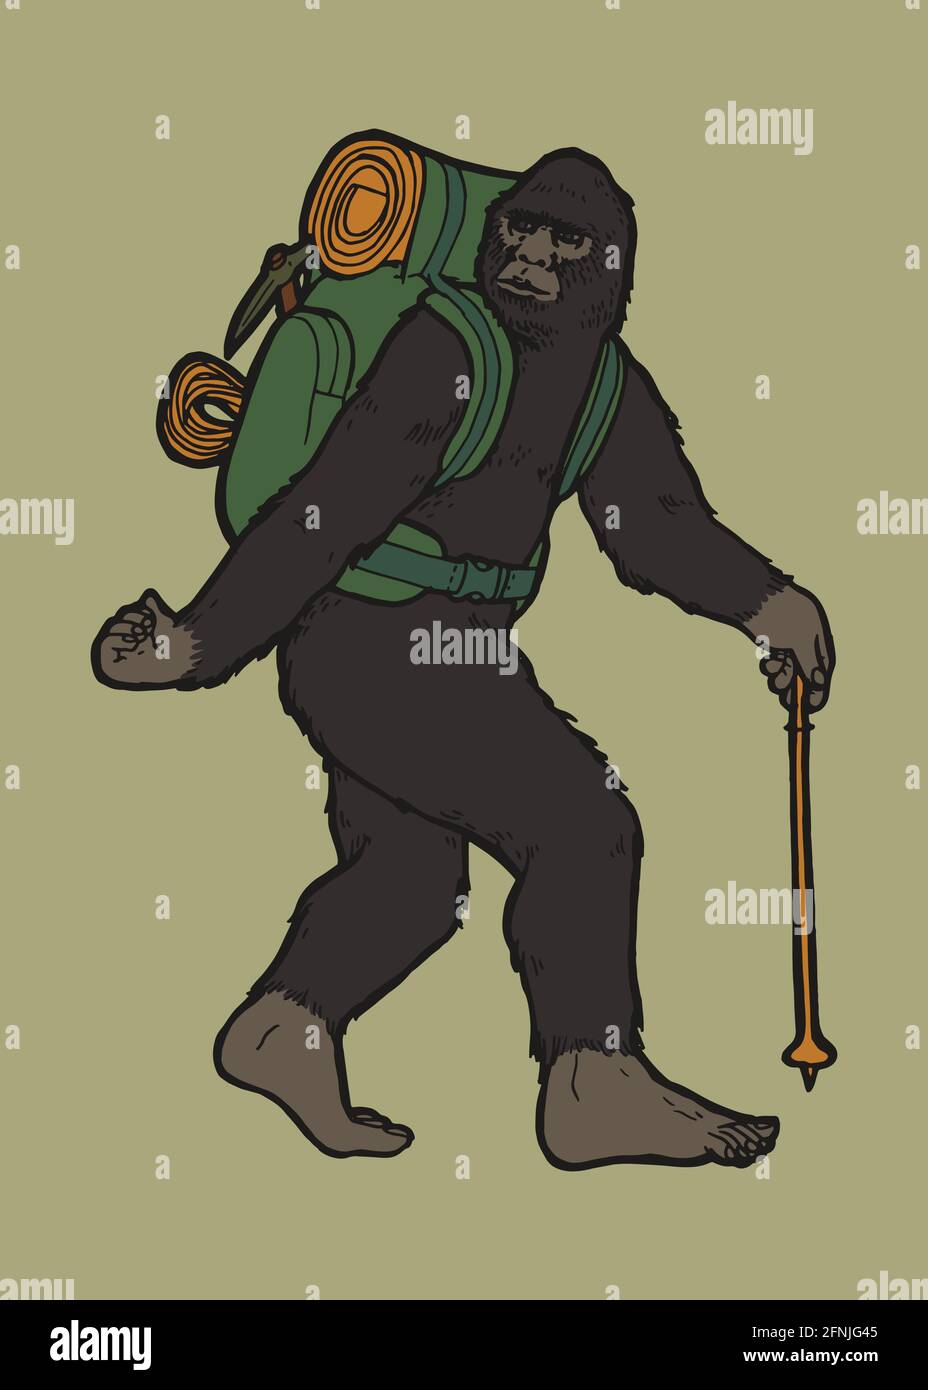 https://c8.alamy.com/comp/2FNJG45/bigfoot-hiker-mystical-sasquatch-character-with-backpack-and-trekking-poles-yeti-traveler-isolated-2FNJG45.jpg